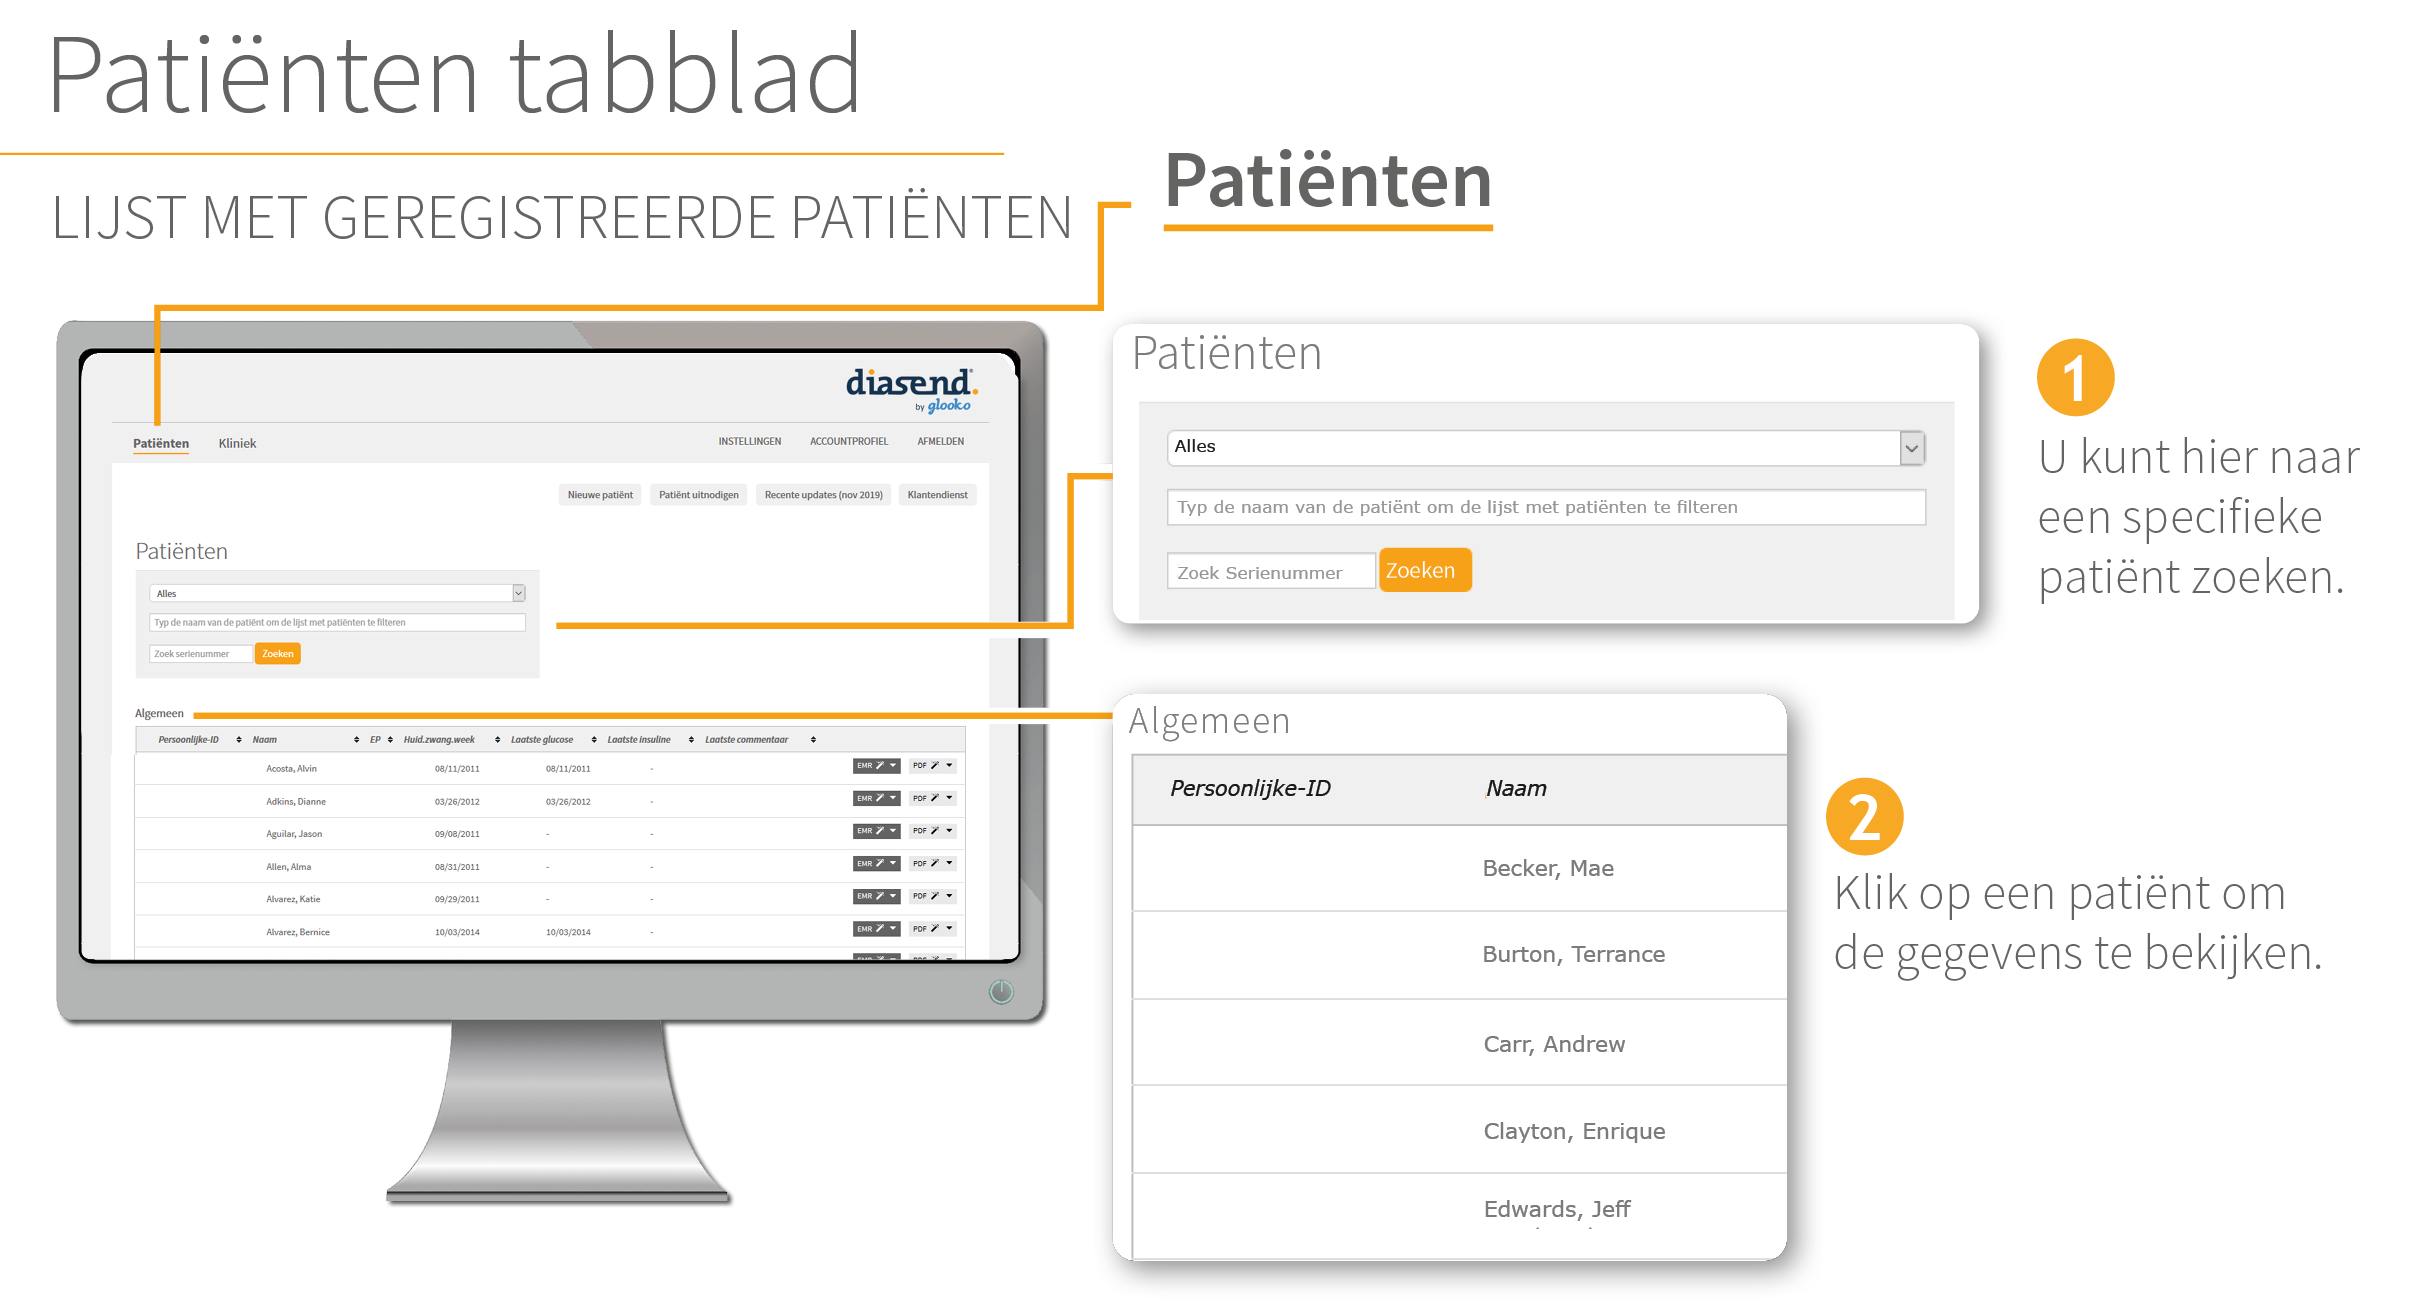 Patient_tab_nl2.png